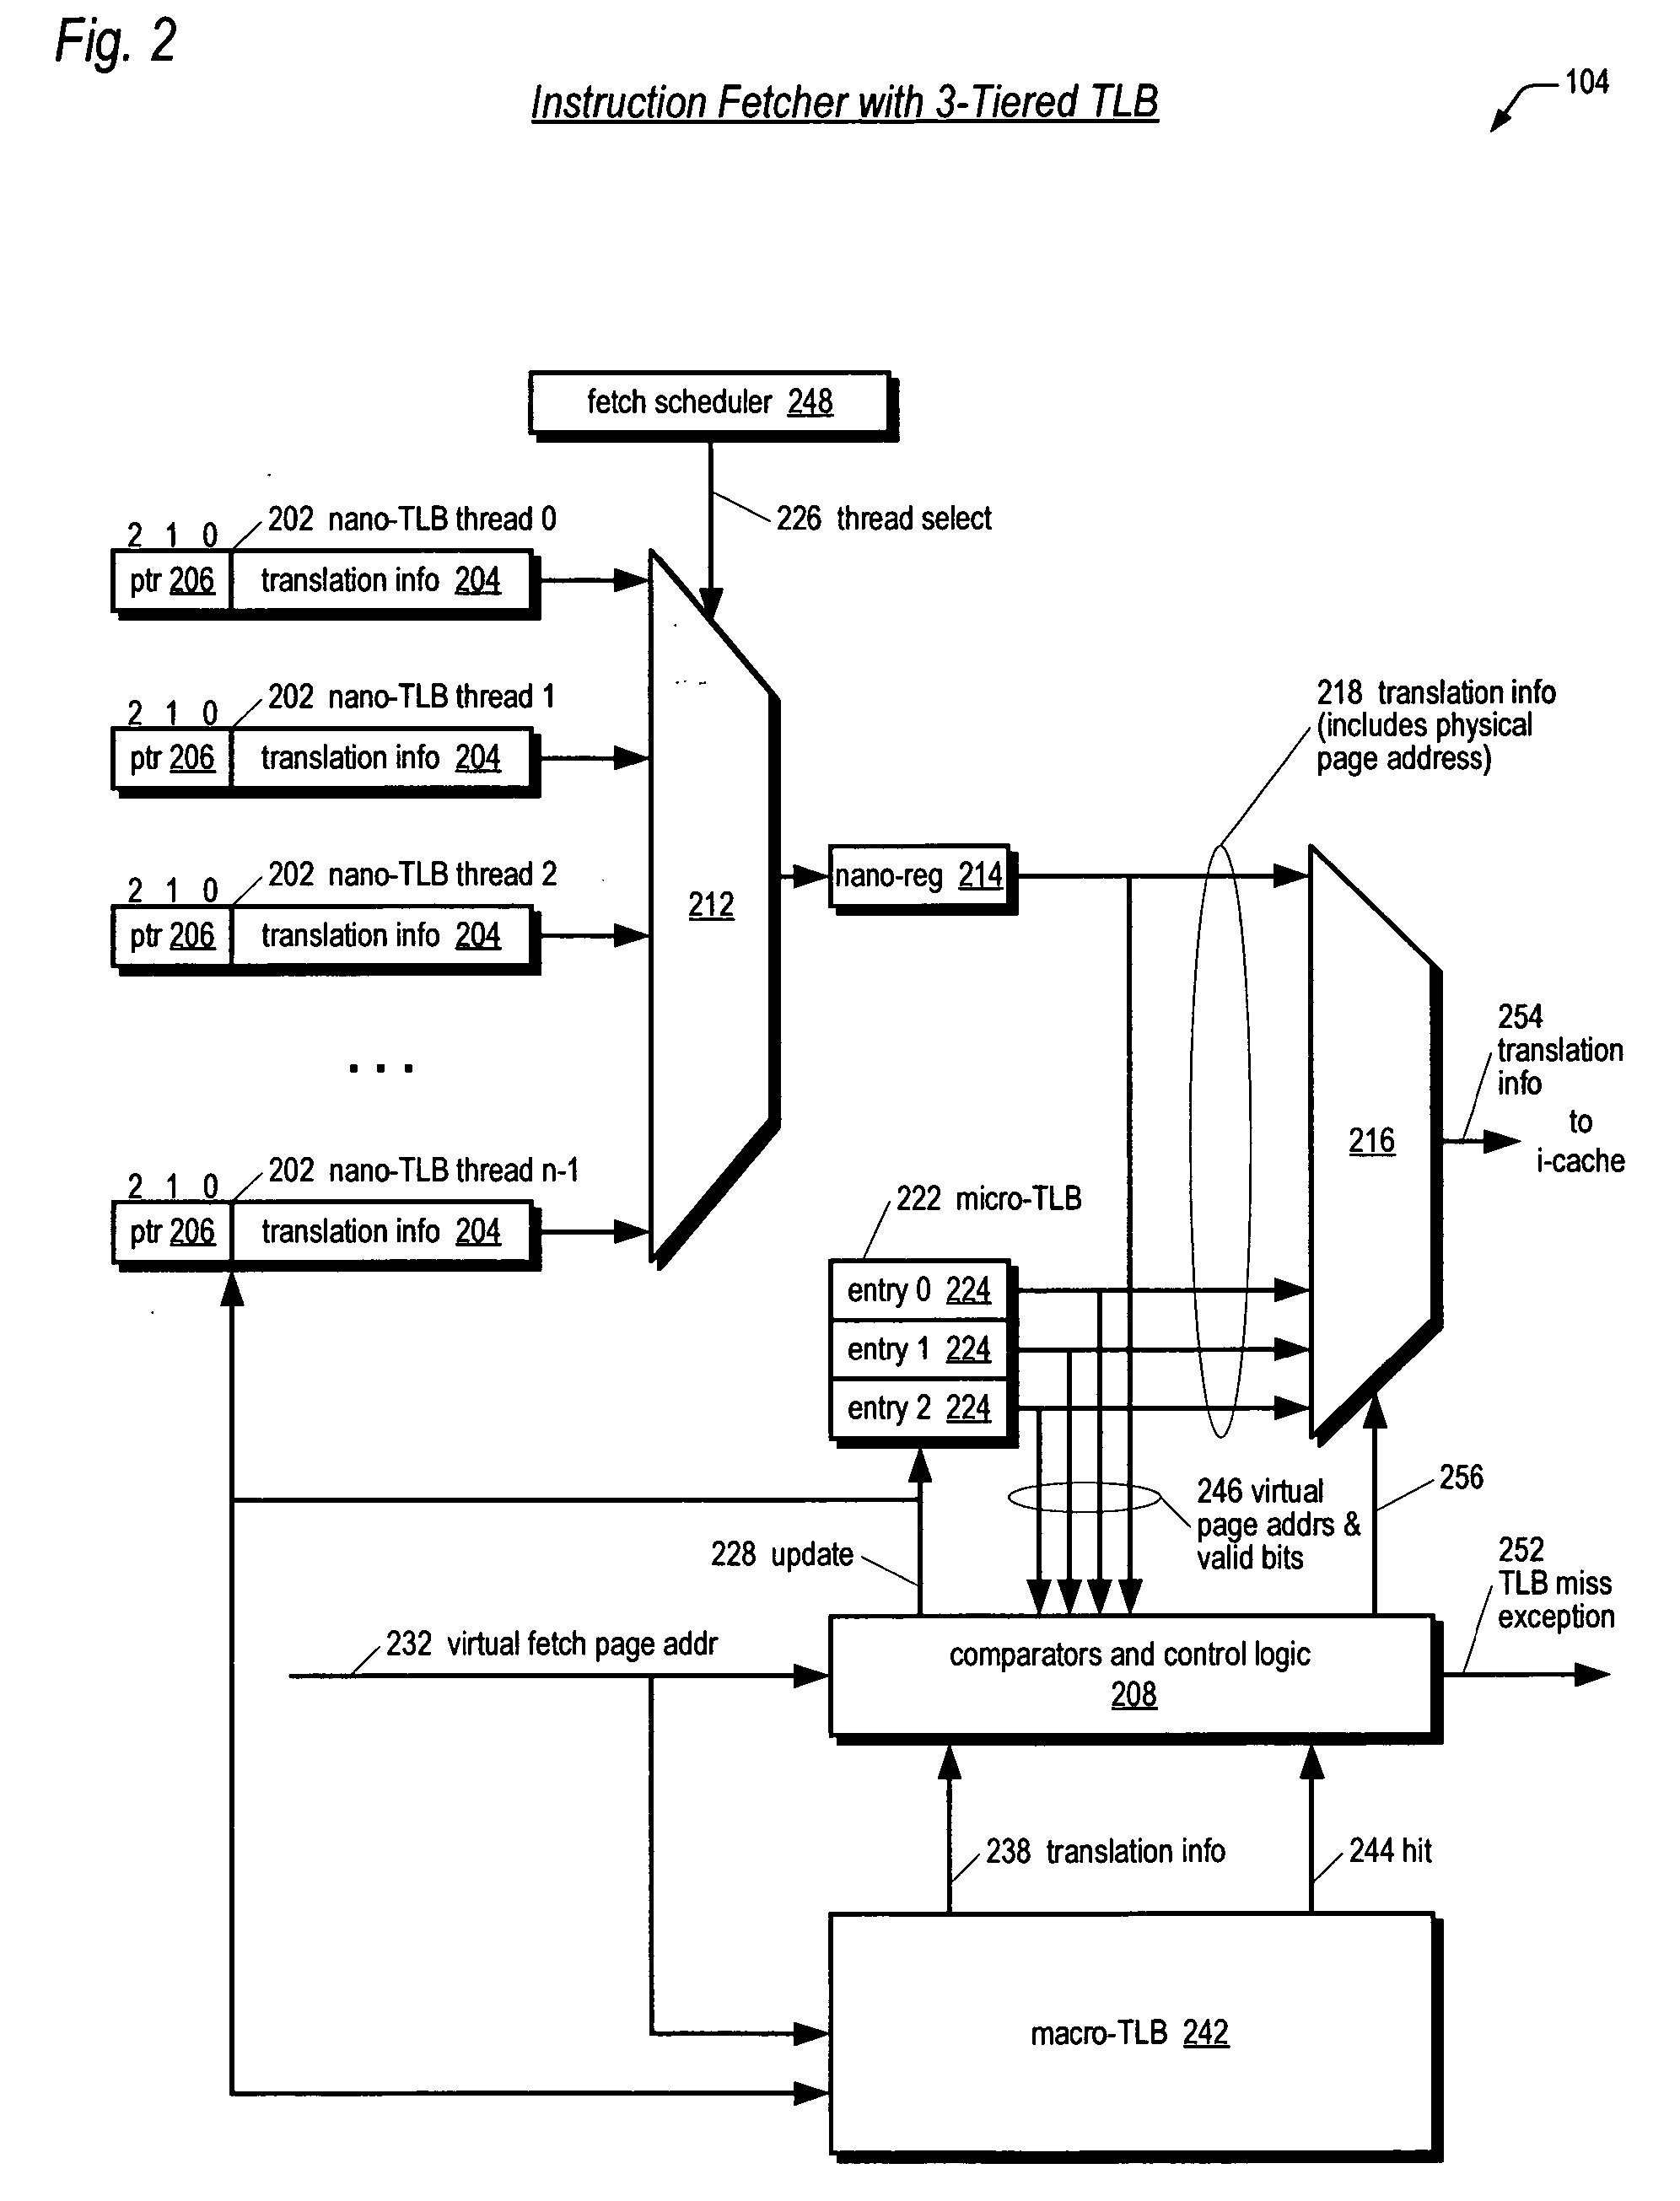 Three-tiered translation lookaside buffer hierarchy in a multithreading microprocessor